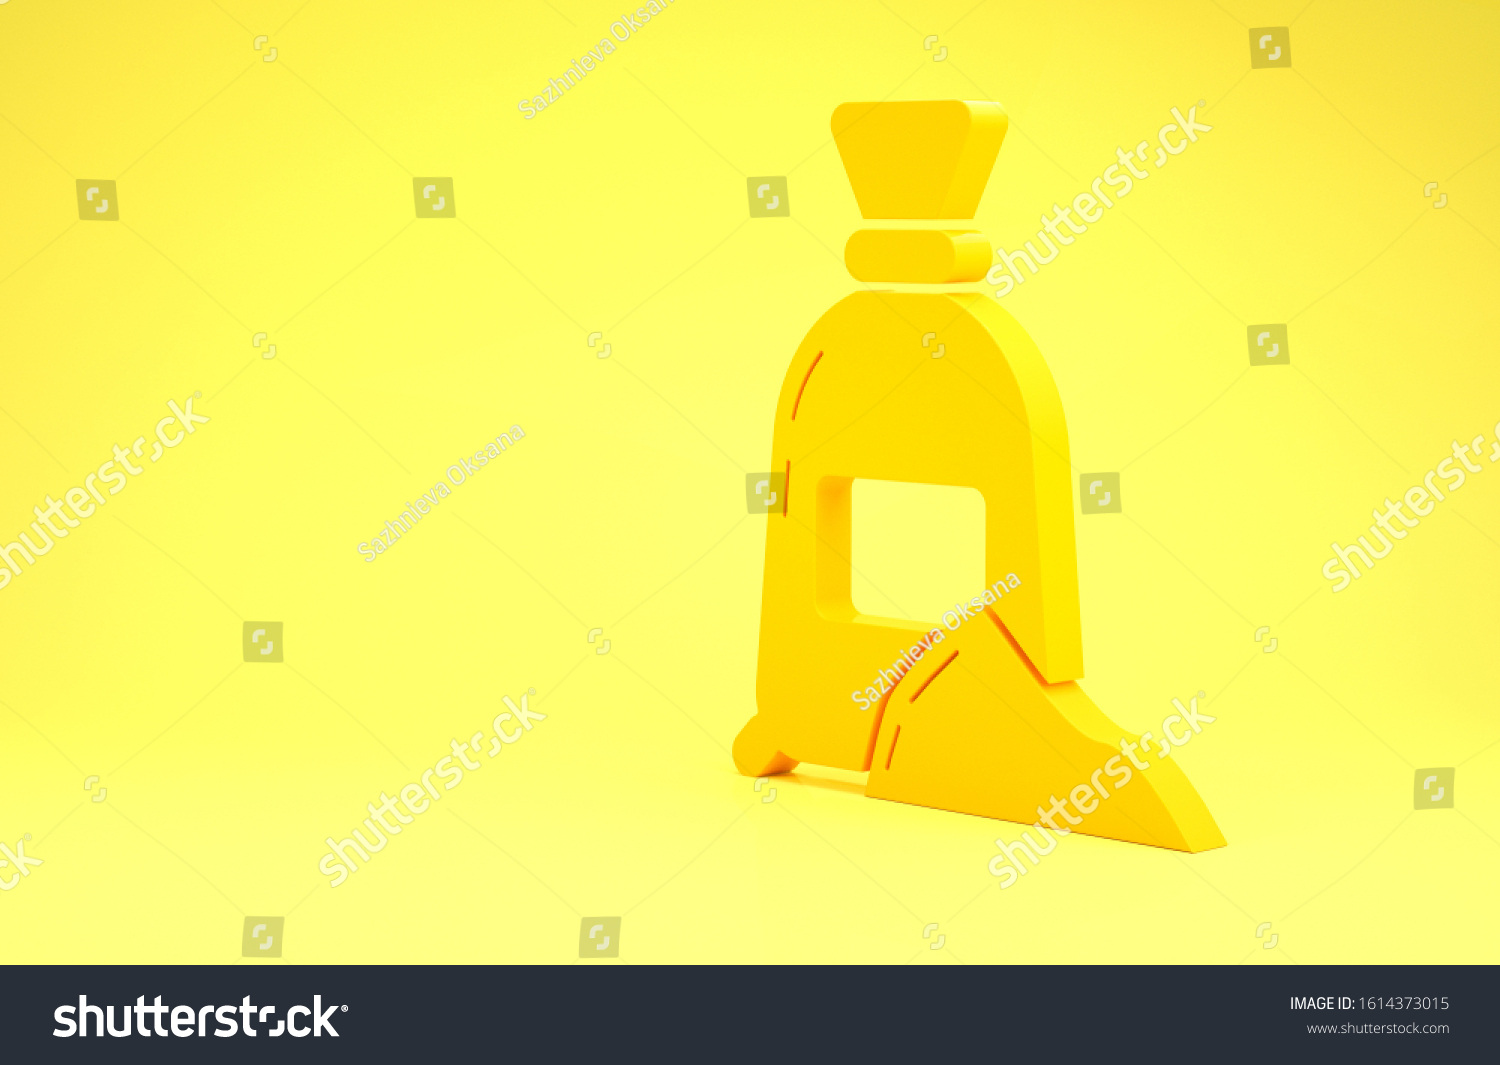 Download Yellow Bag Flour Icon Isolated On Stock Illustration 1614373015 PSD Mockup Templates